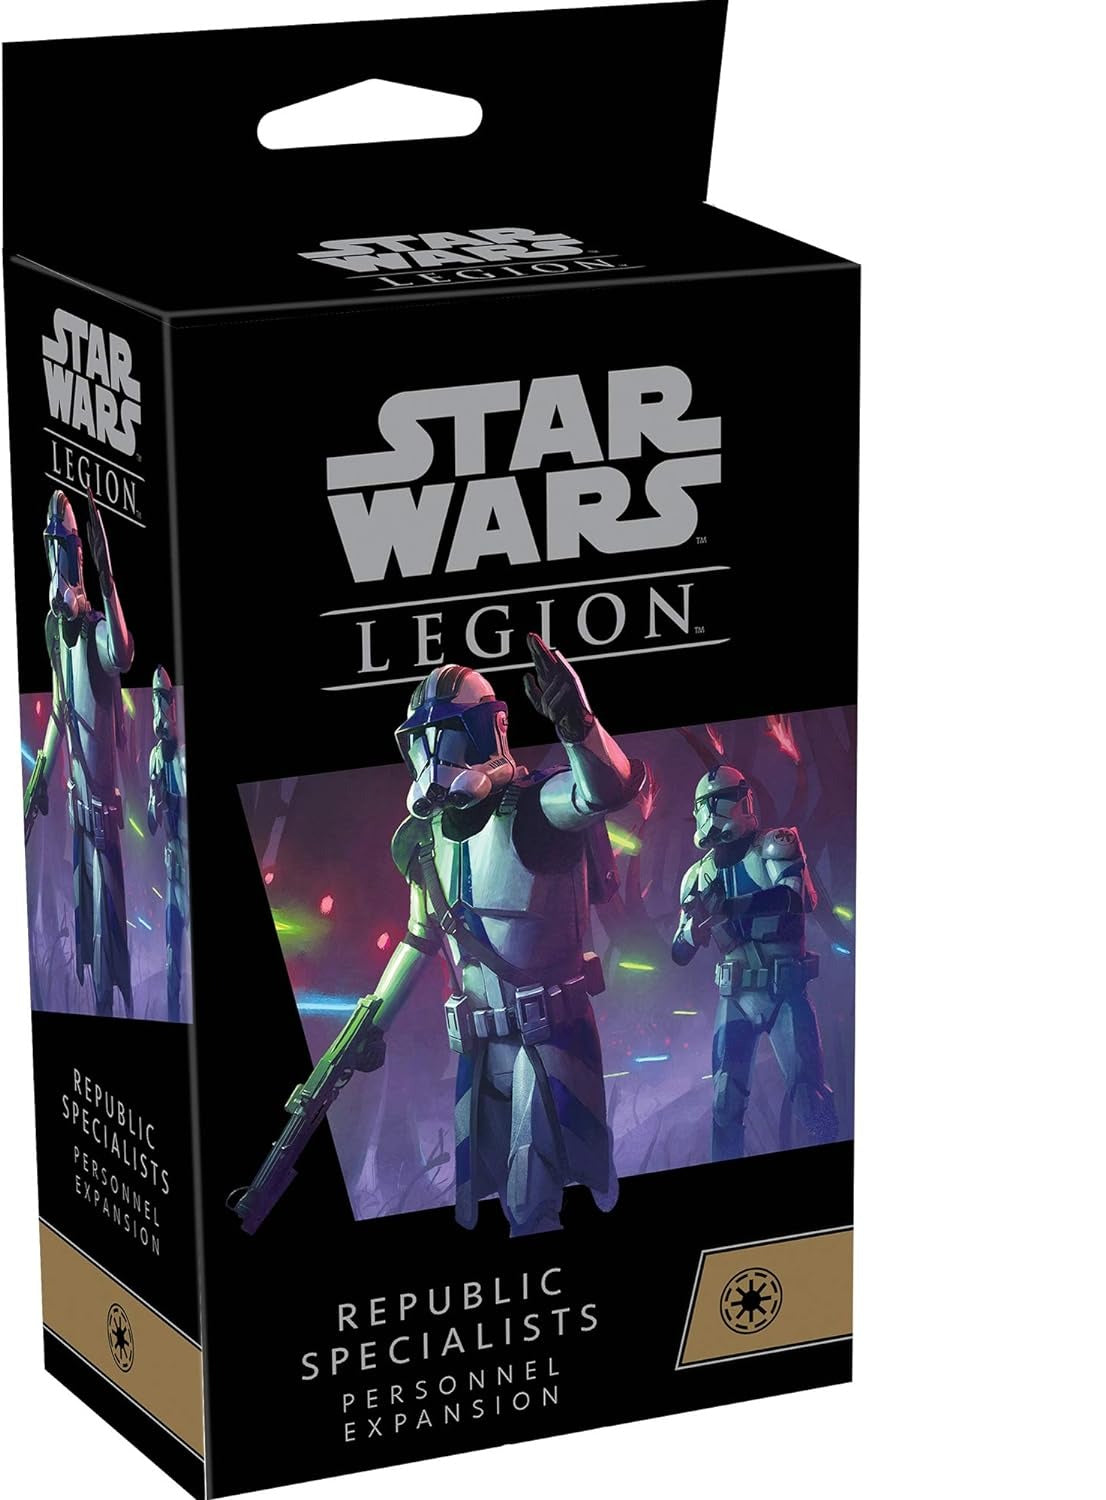 Star Wars Legion: Republic Specialists Personnel Expansion - Loaded Dice